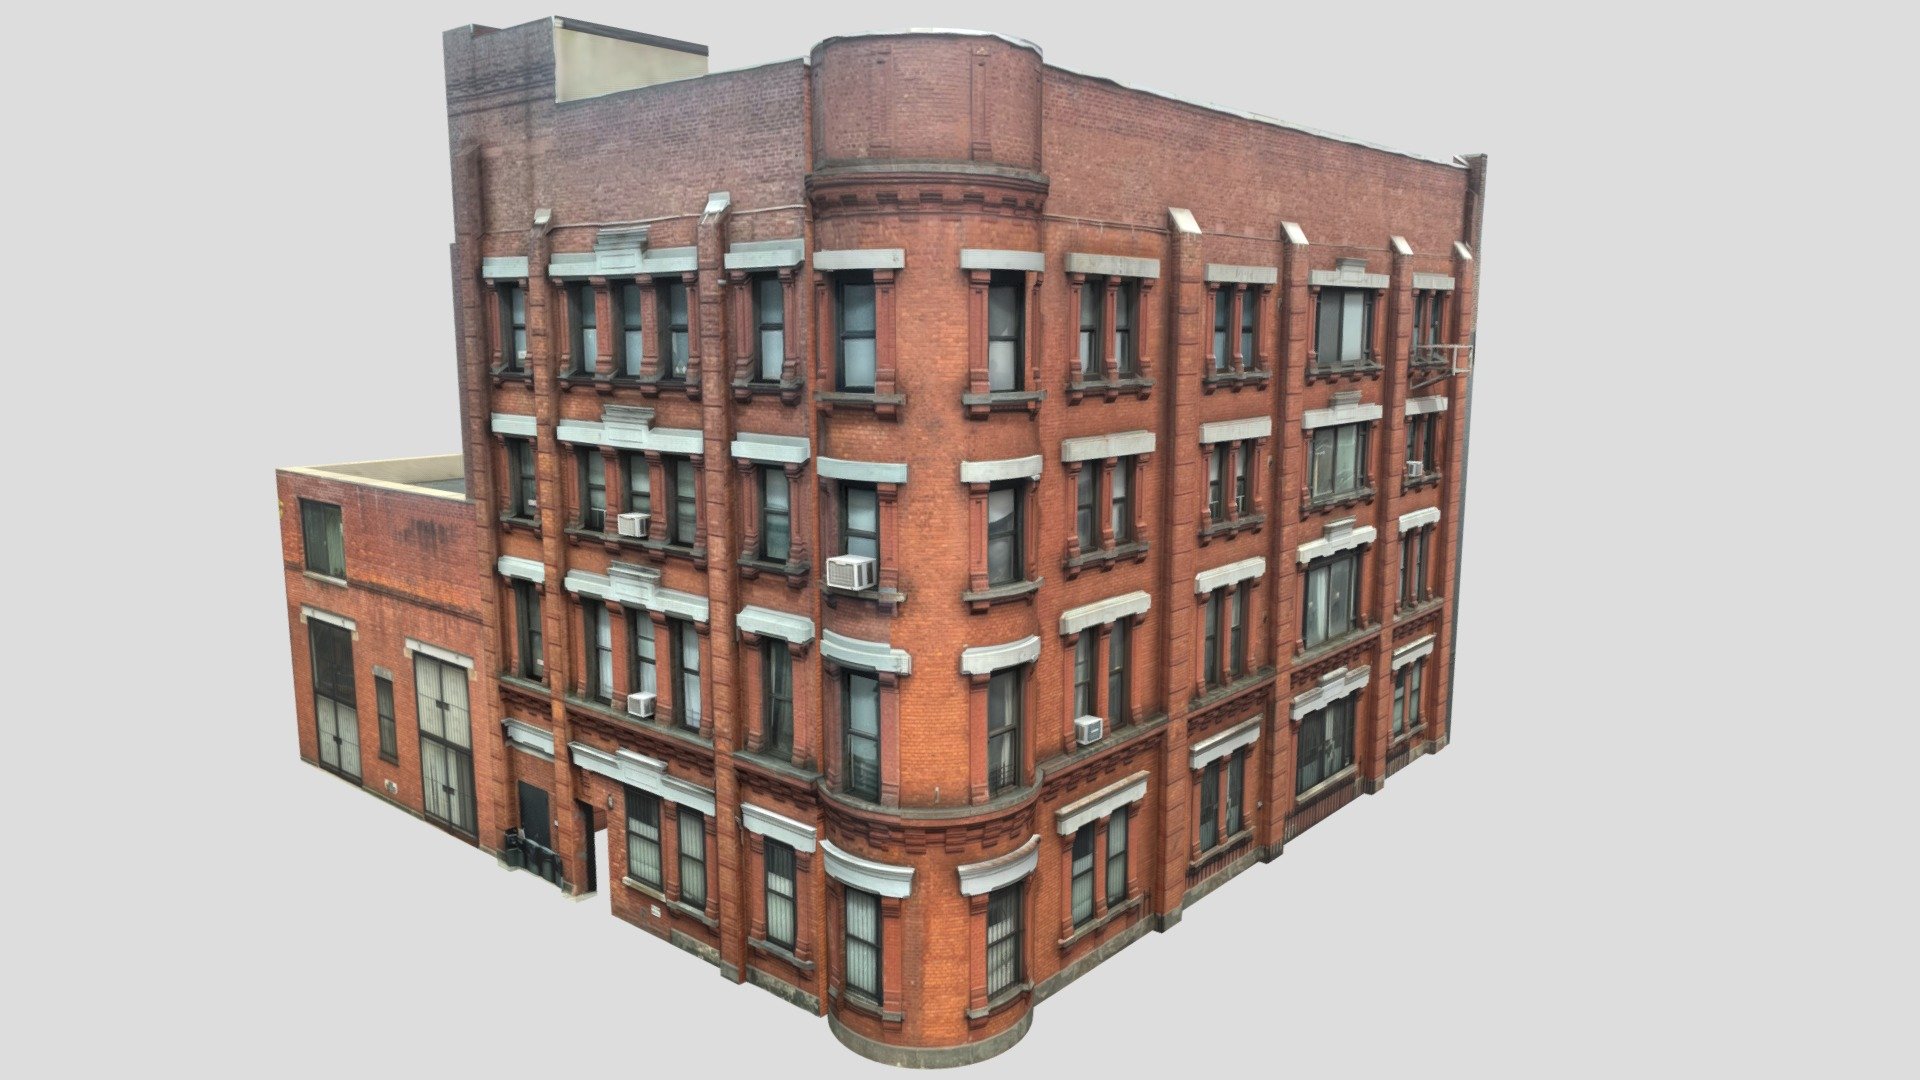 Modeled from 3 photos of a real building in Brooklyn, NY 3d model